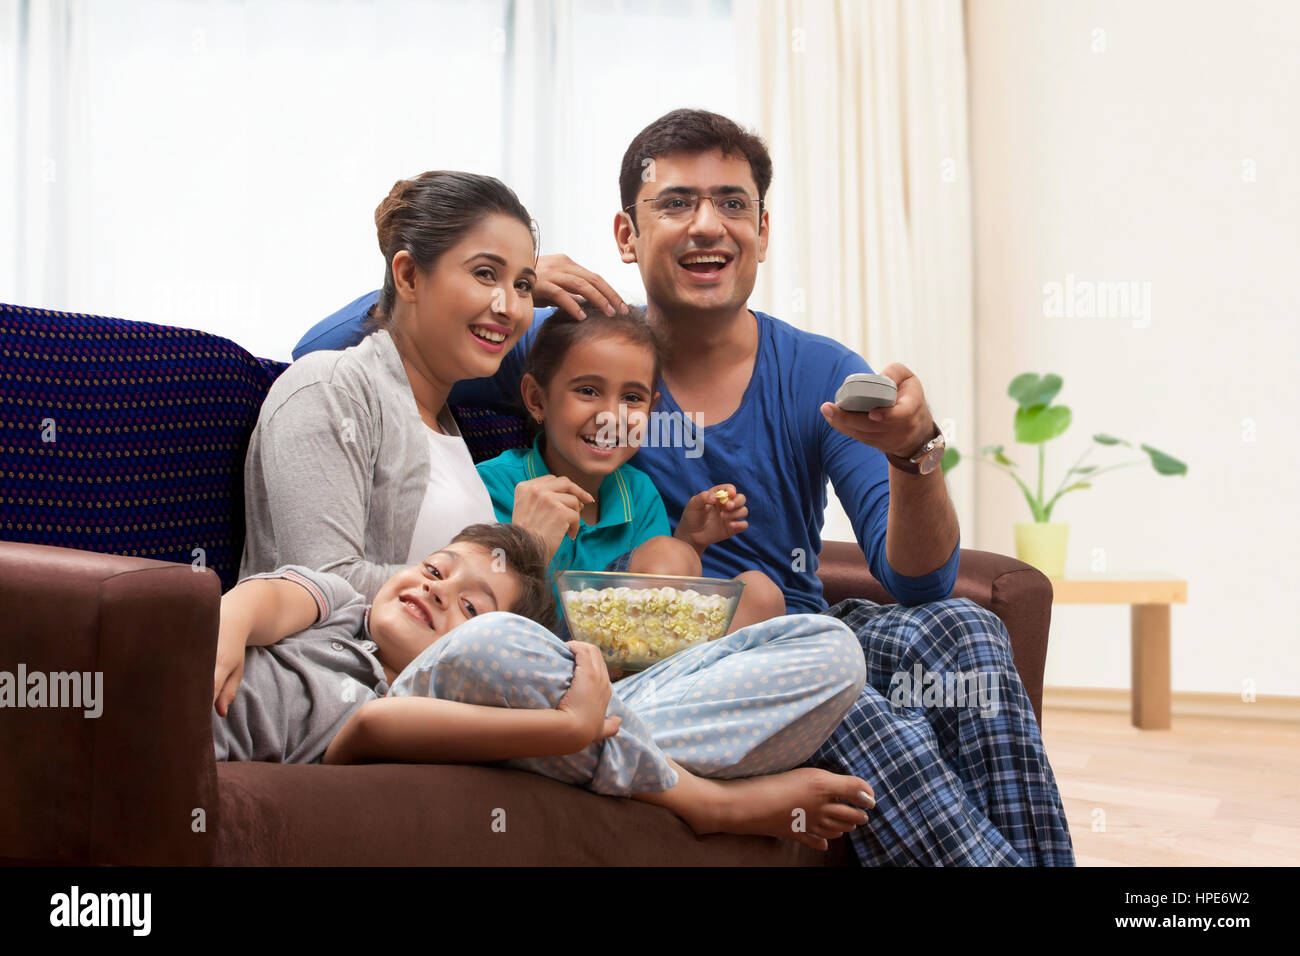 Happy family watching television together and eating popcorn Stock Photo